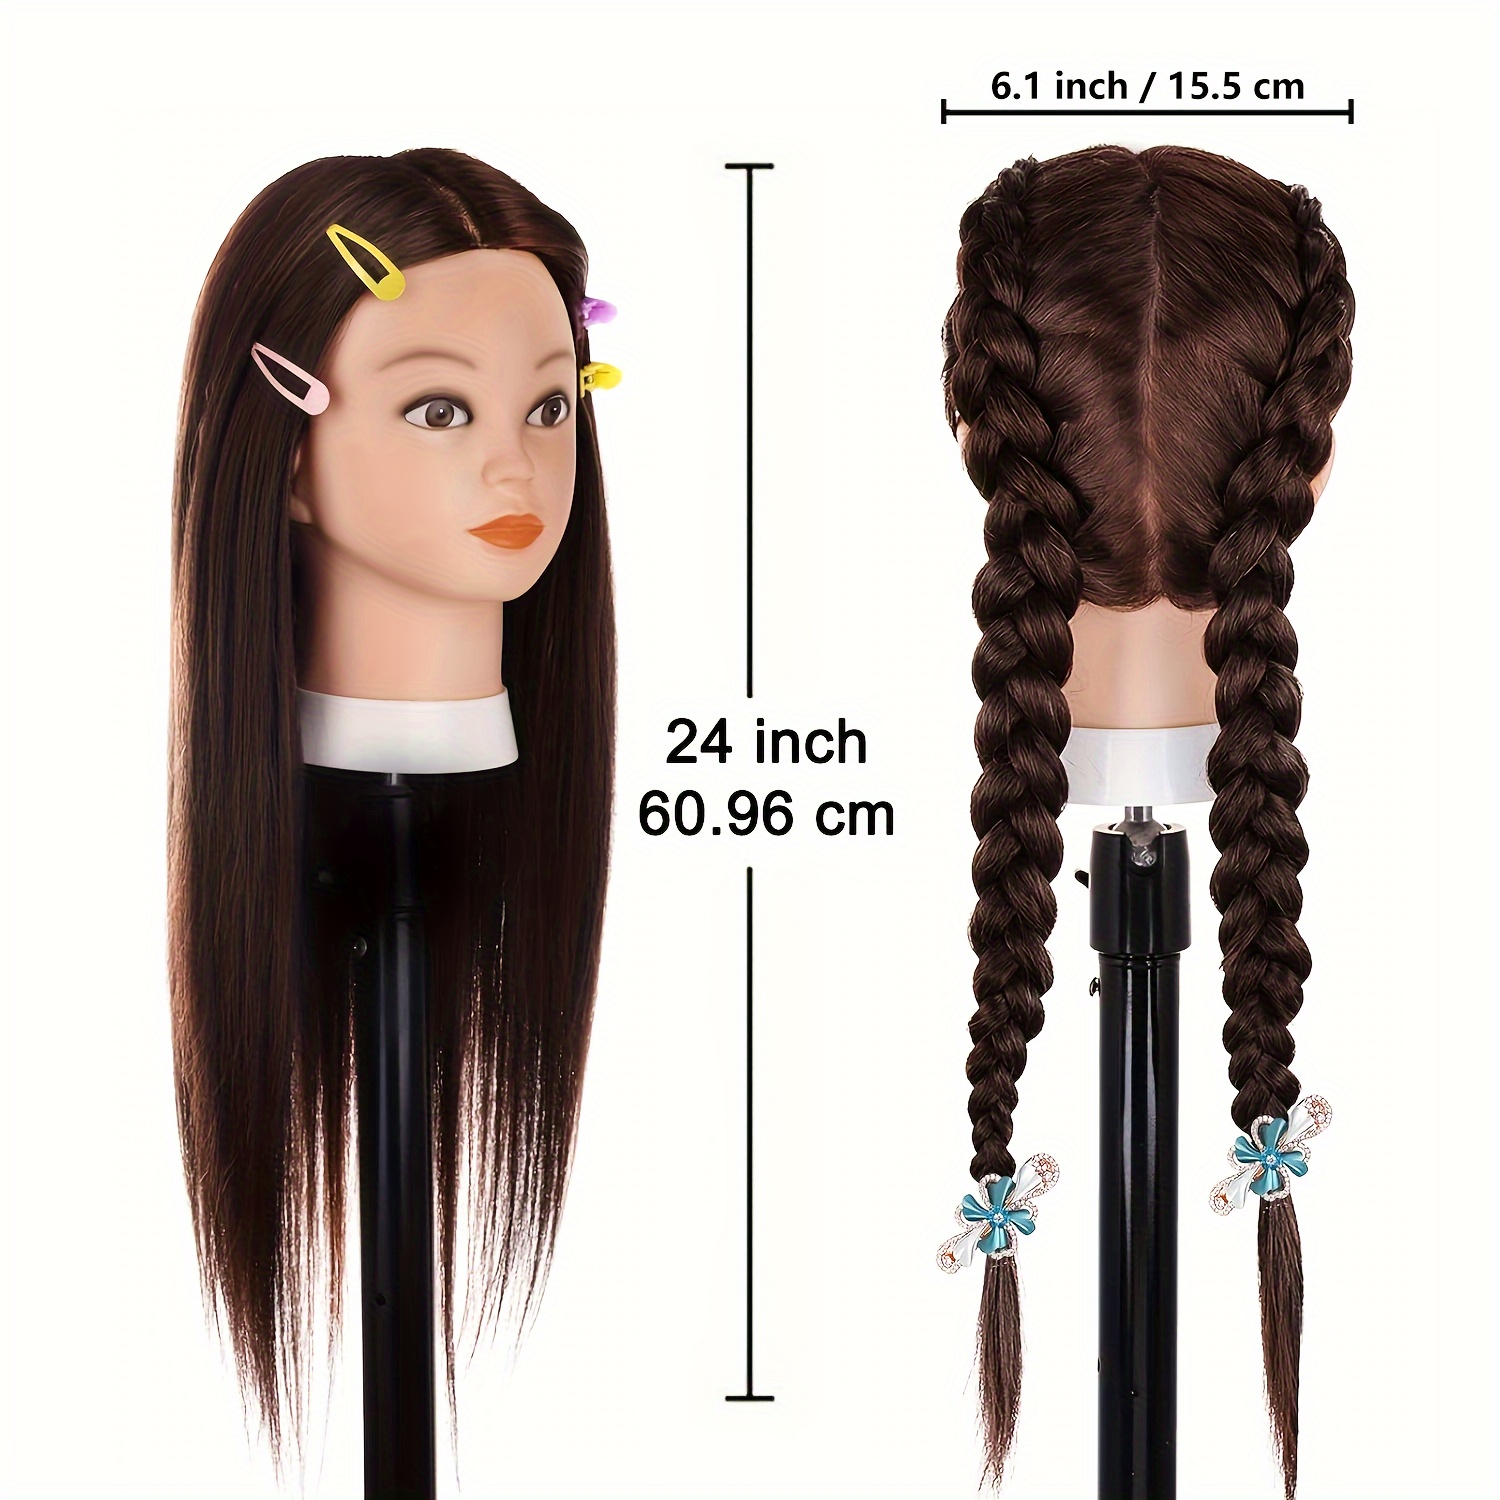  Doll Head For Hair Styling